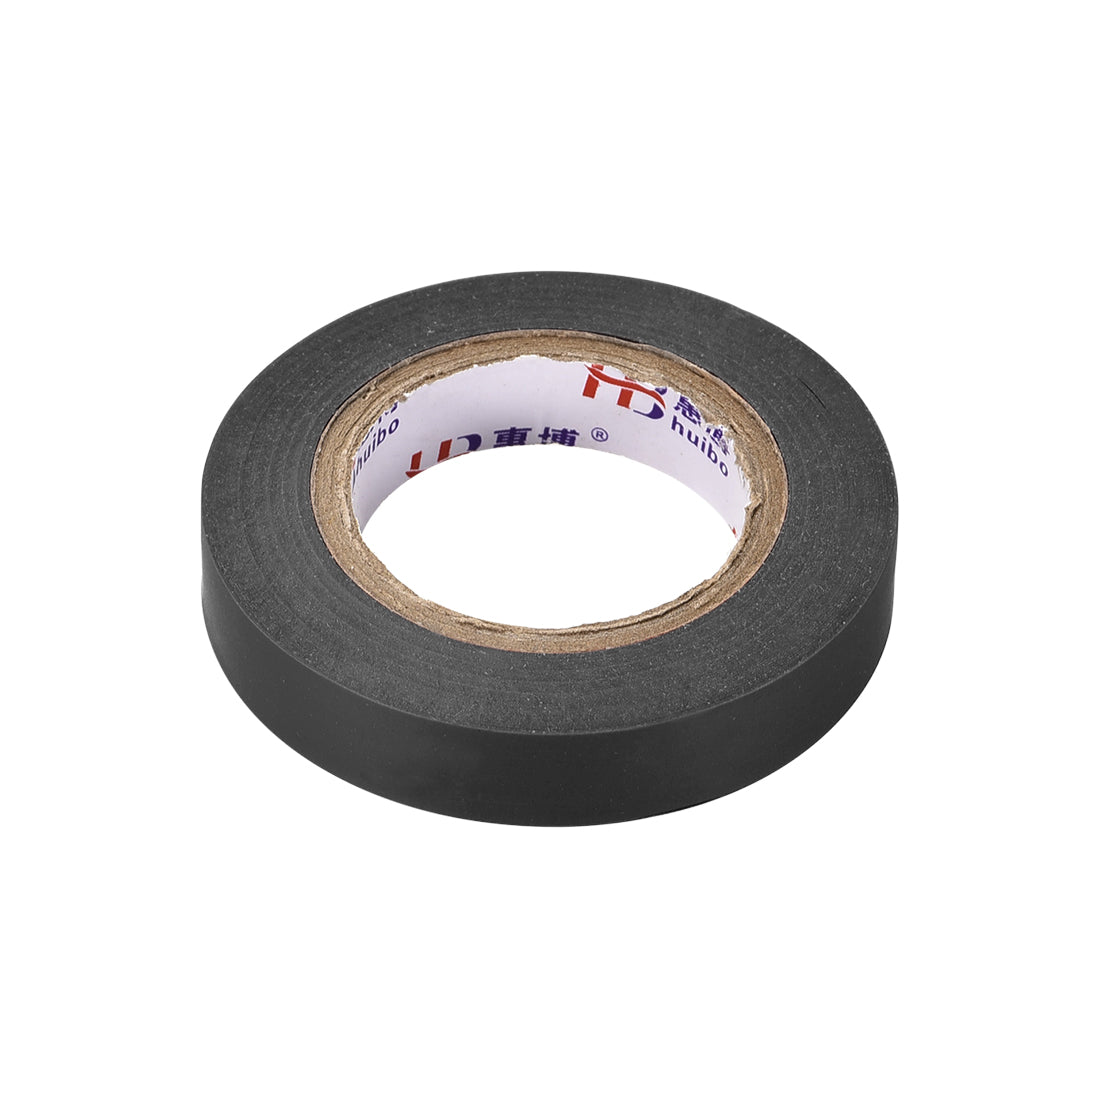 uxcell Uxcell Insulating Tape 15mm Width 14.5M Long 0.15mm Thick PVC Electrical Tape Rated for Max. 400V  80C Use Black  2pcs